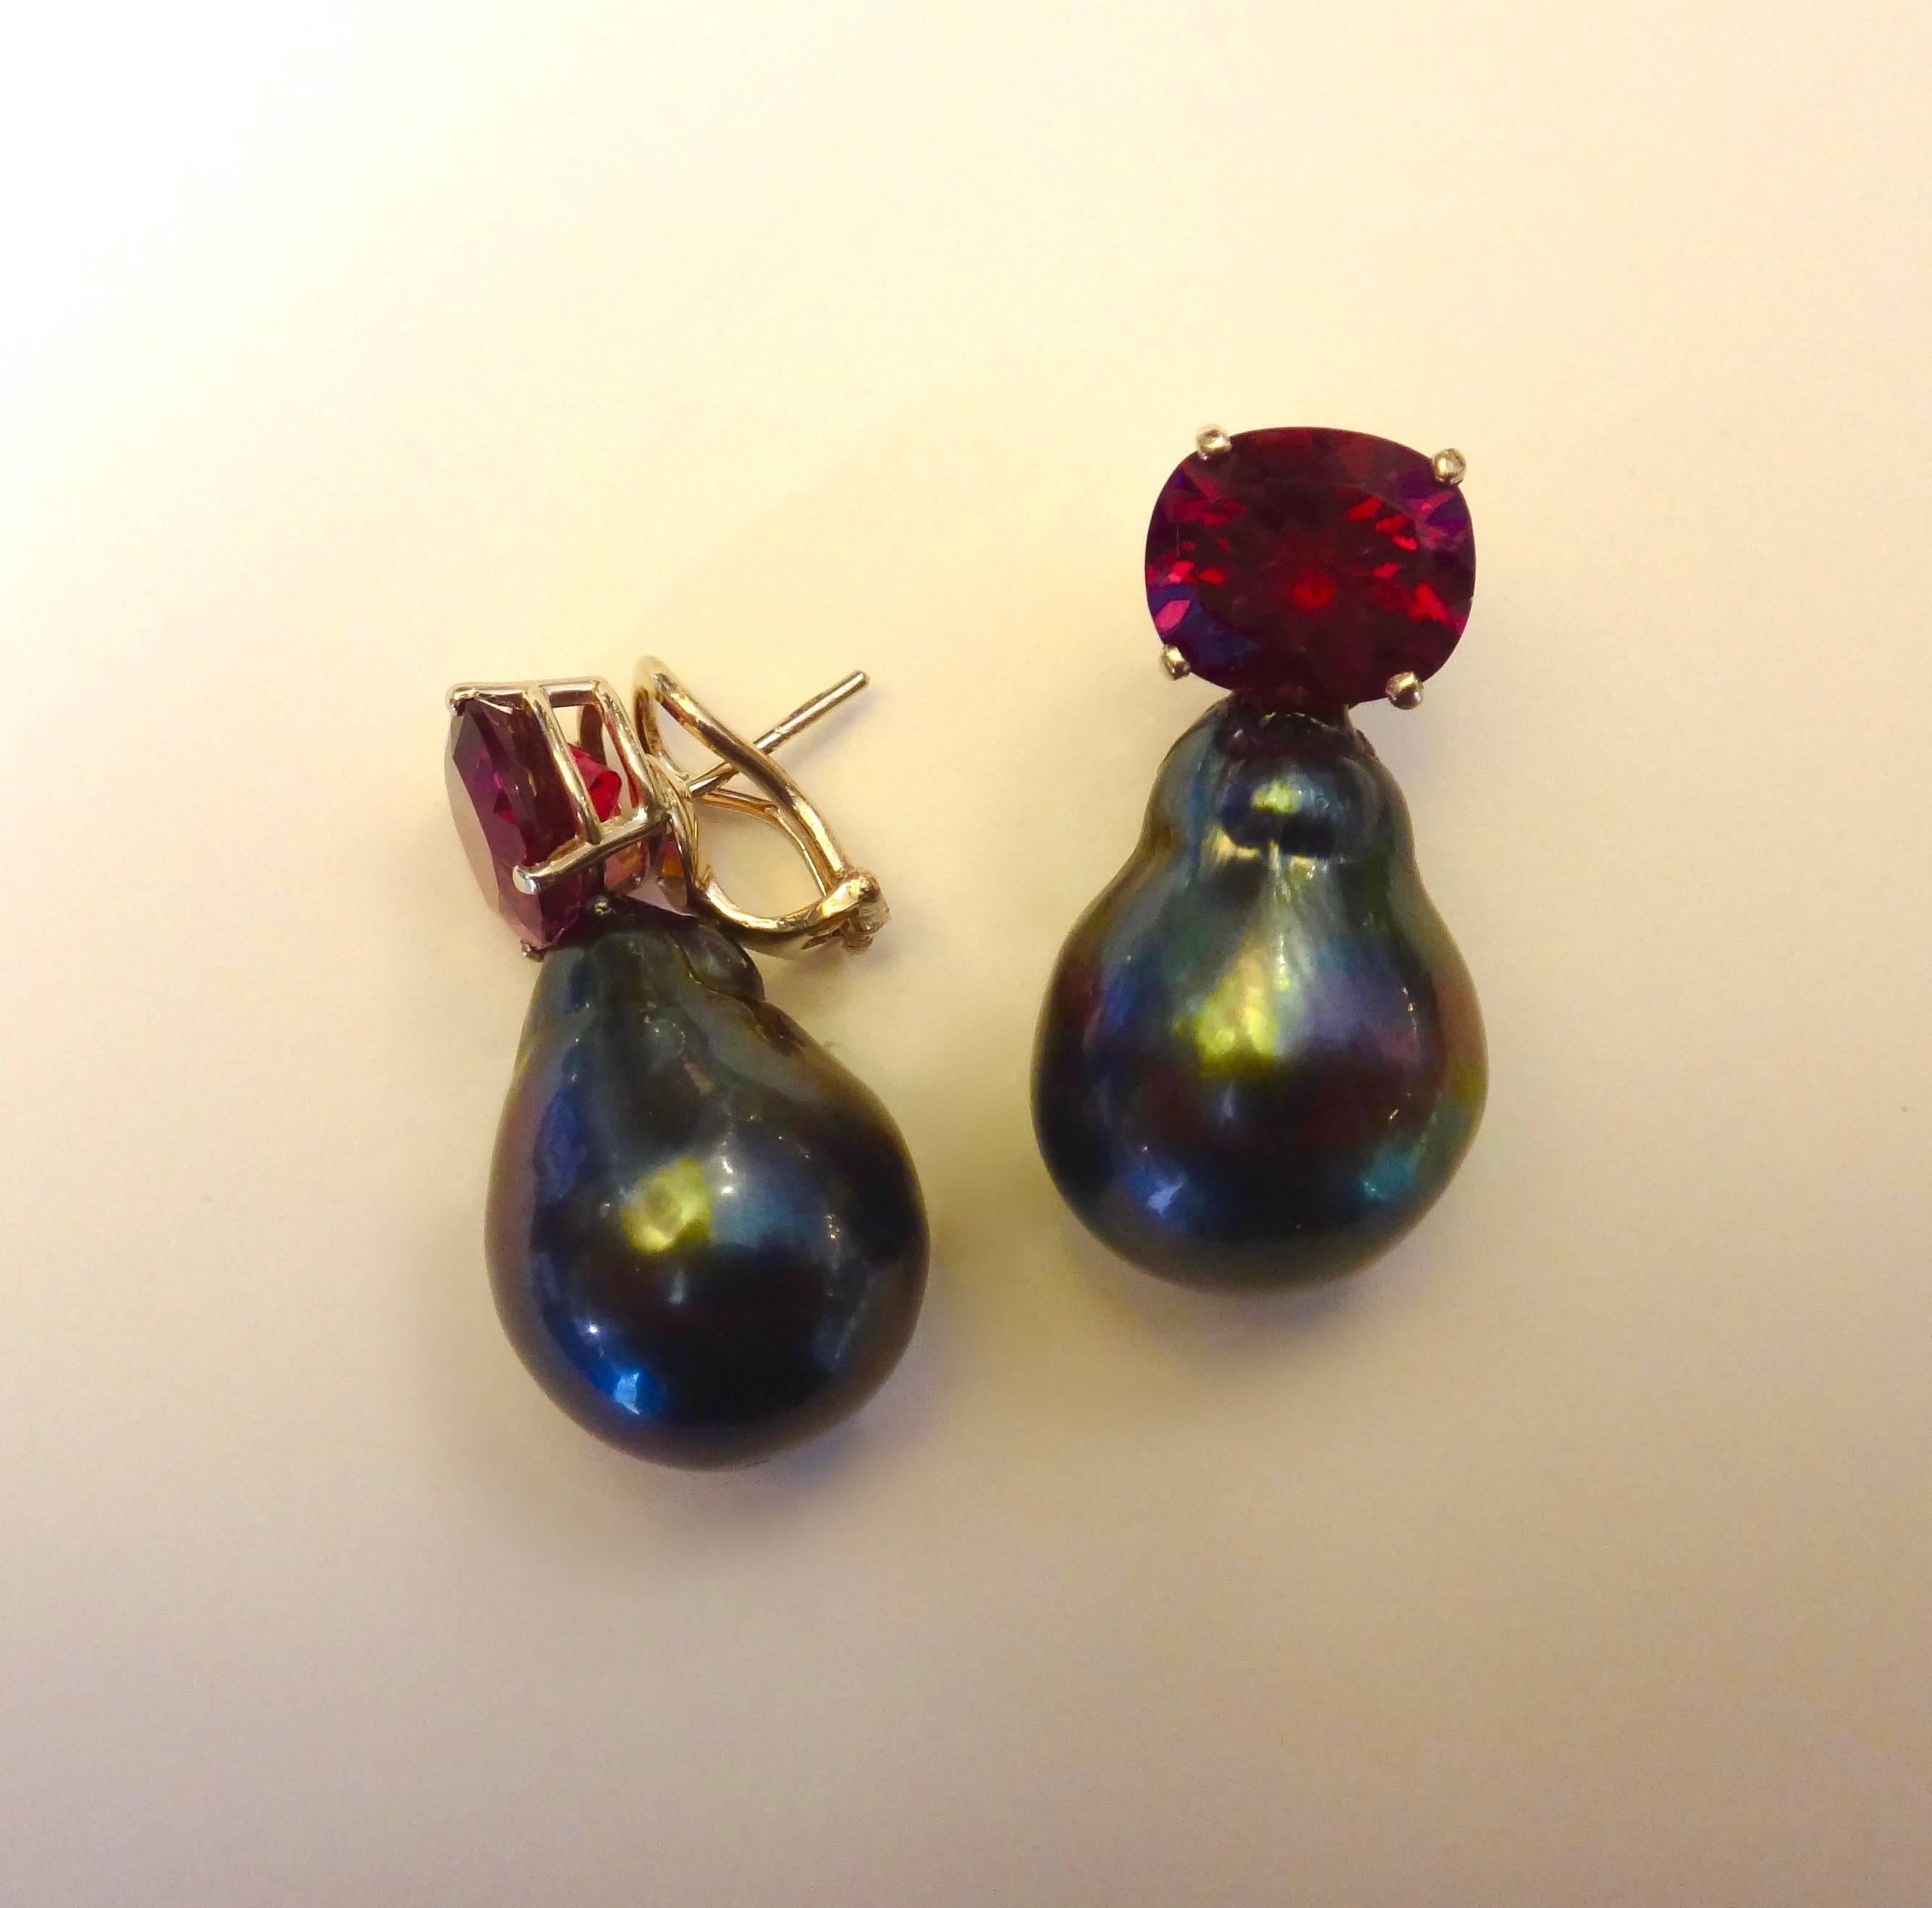  Faceted, cushion shaped and perfectly matched rubelites (red tourmaline) of the finest color and quality are paired with huge, baroque Tahitian pearls in these 